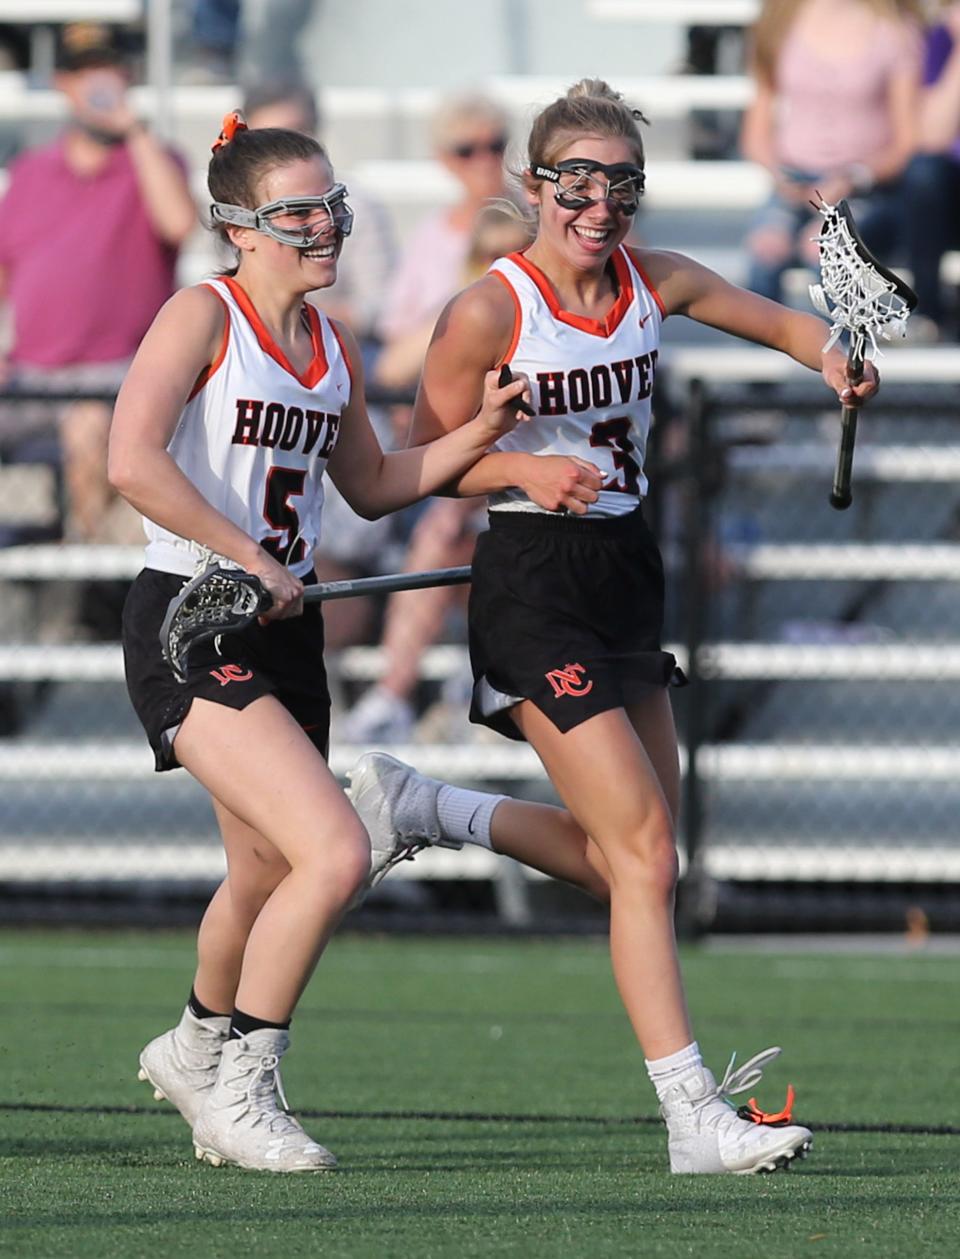 Lily Cain (3) of Hoover celebrates her goal with Lilly Altman (5) during their game against Jackson at Hoover on Tuesday, April 27, 2021.